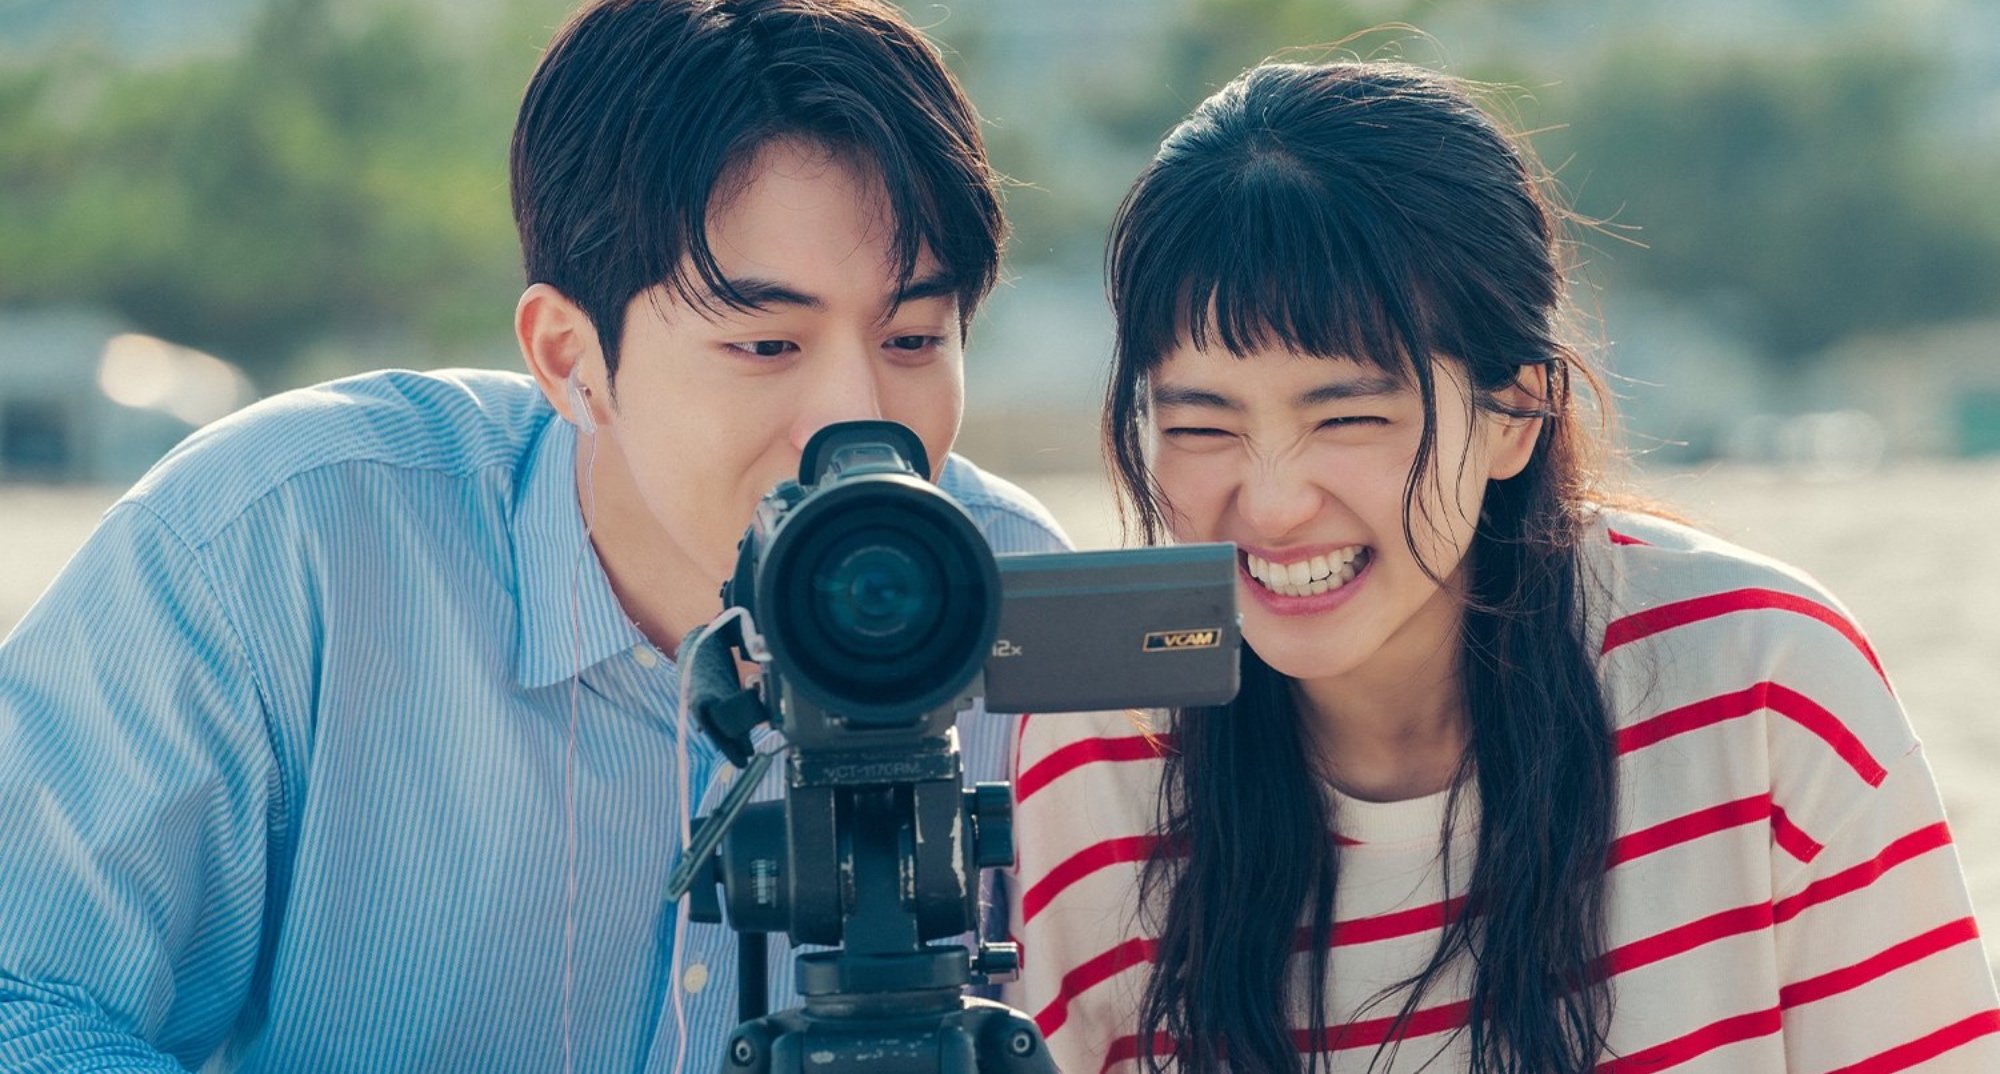 Characters Back Yi-jin and Nah Hee-do on 'Twenty-Five Twenty-One' smiling at camcorder in relation to age-gap romance.